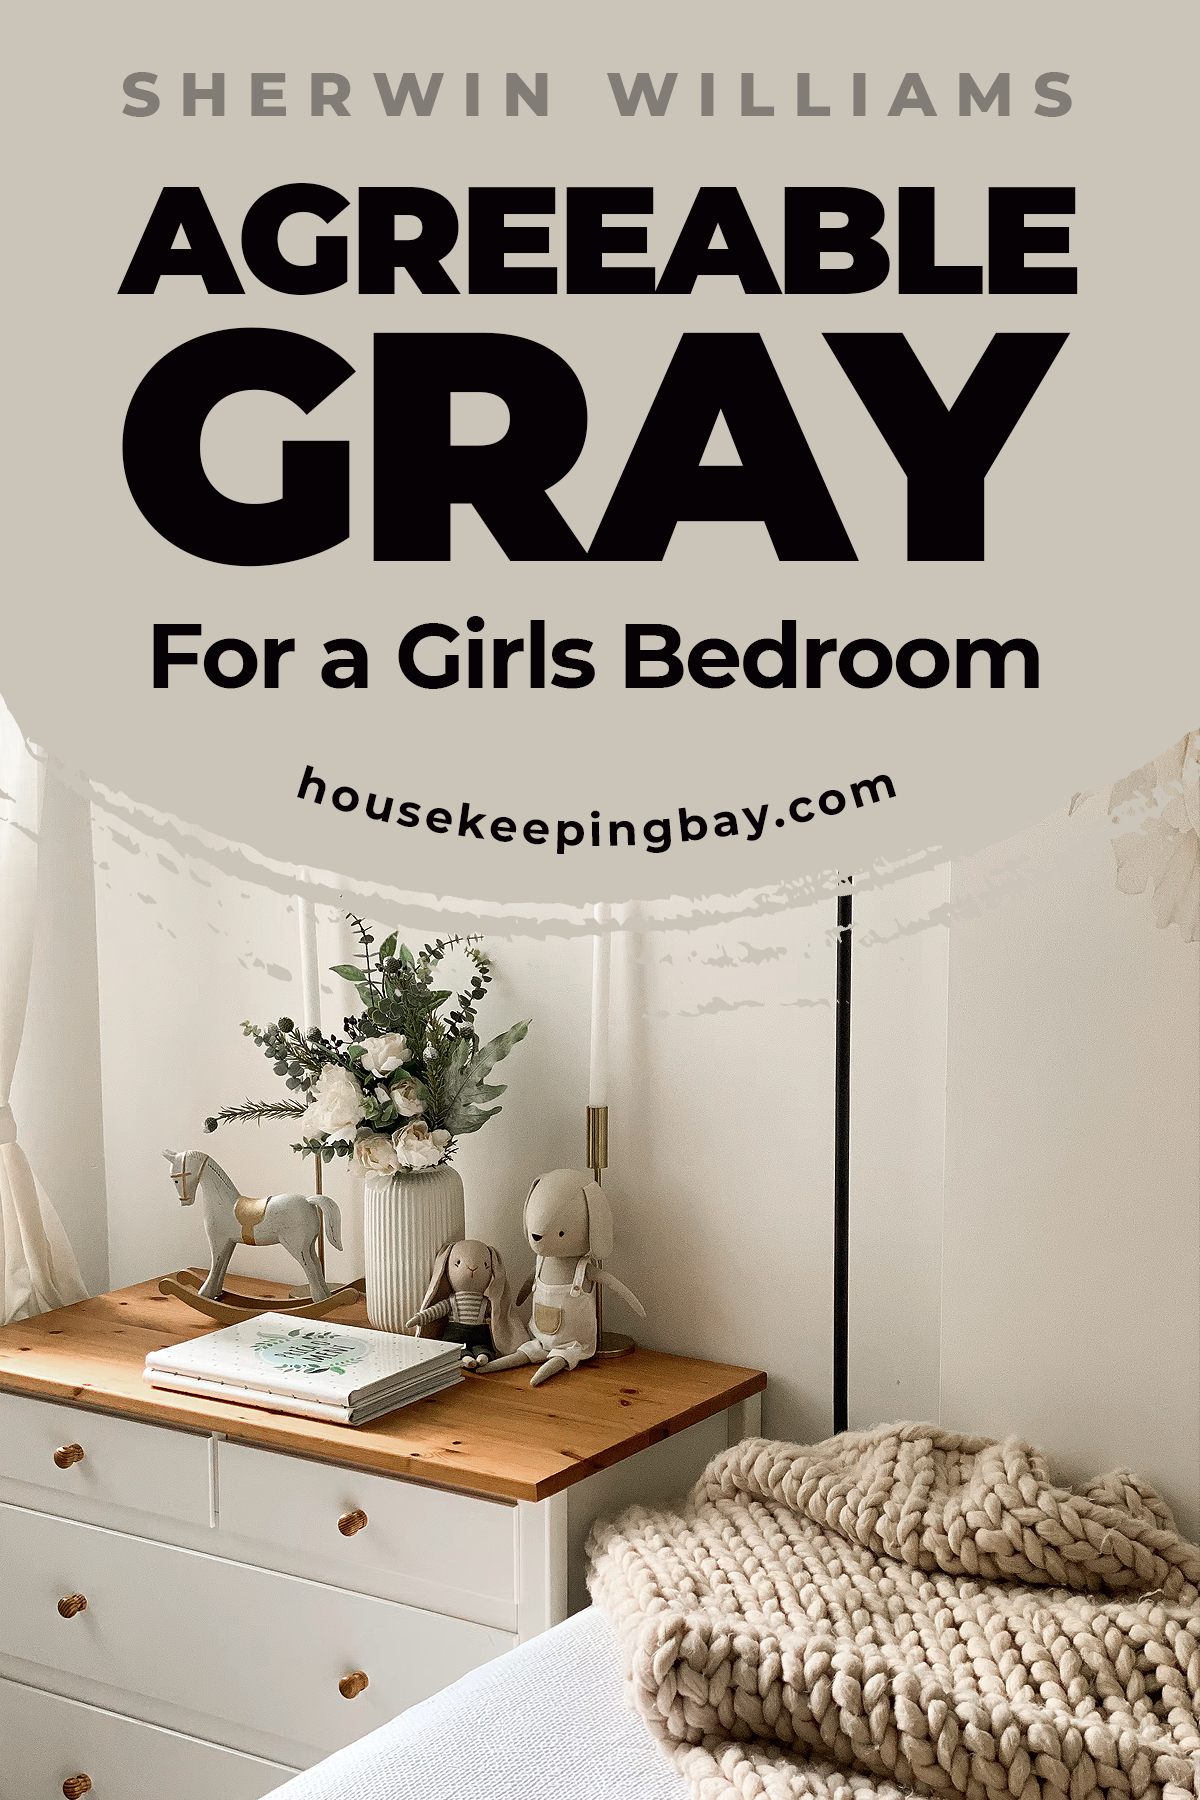 Agreeable Gray For a girls bedroom